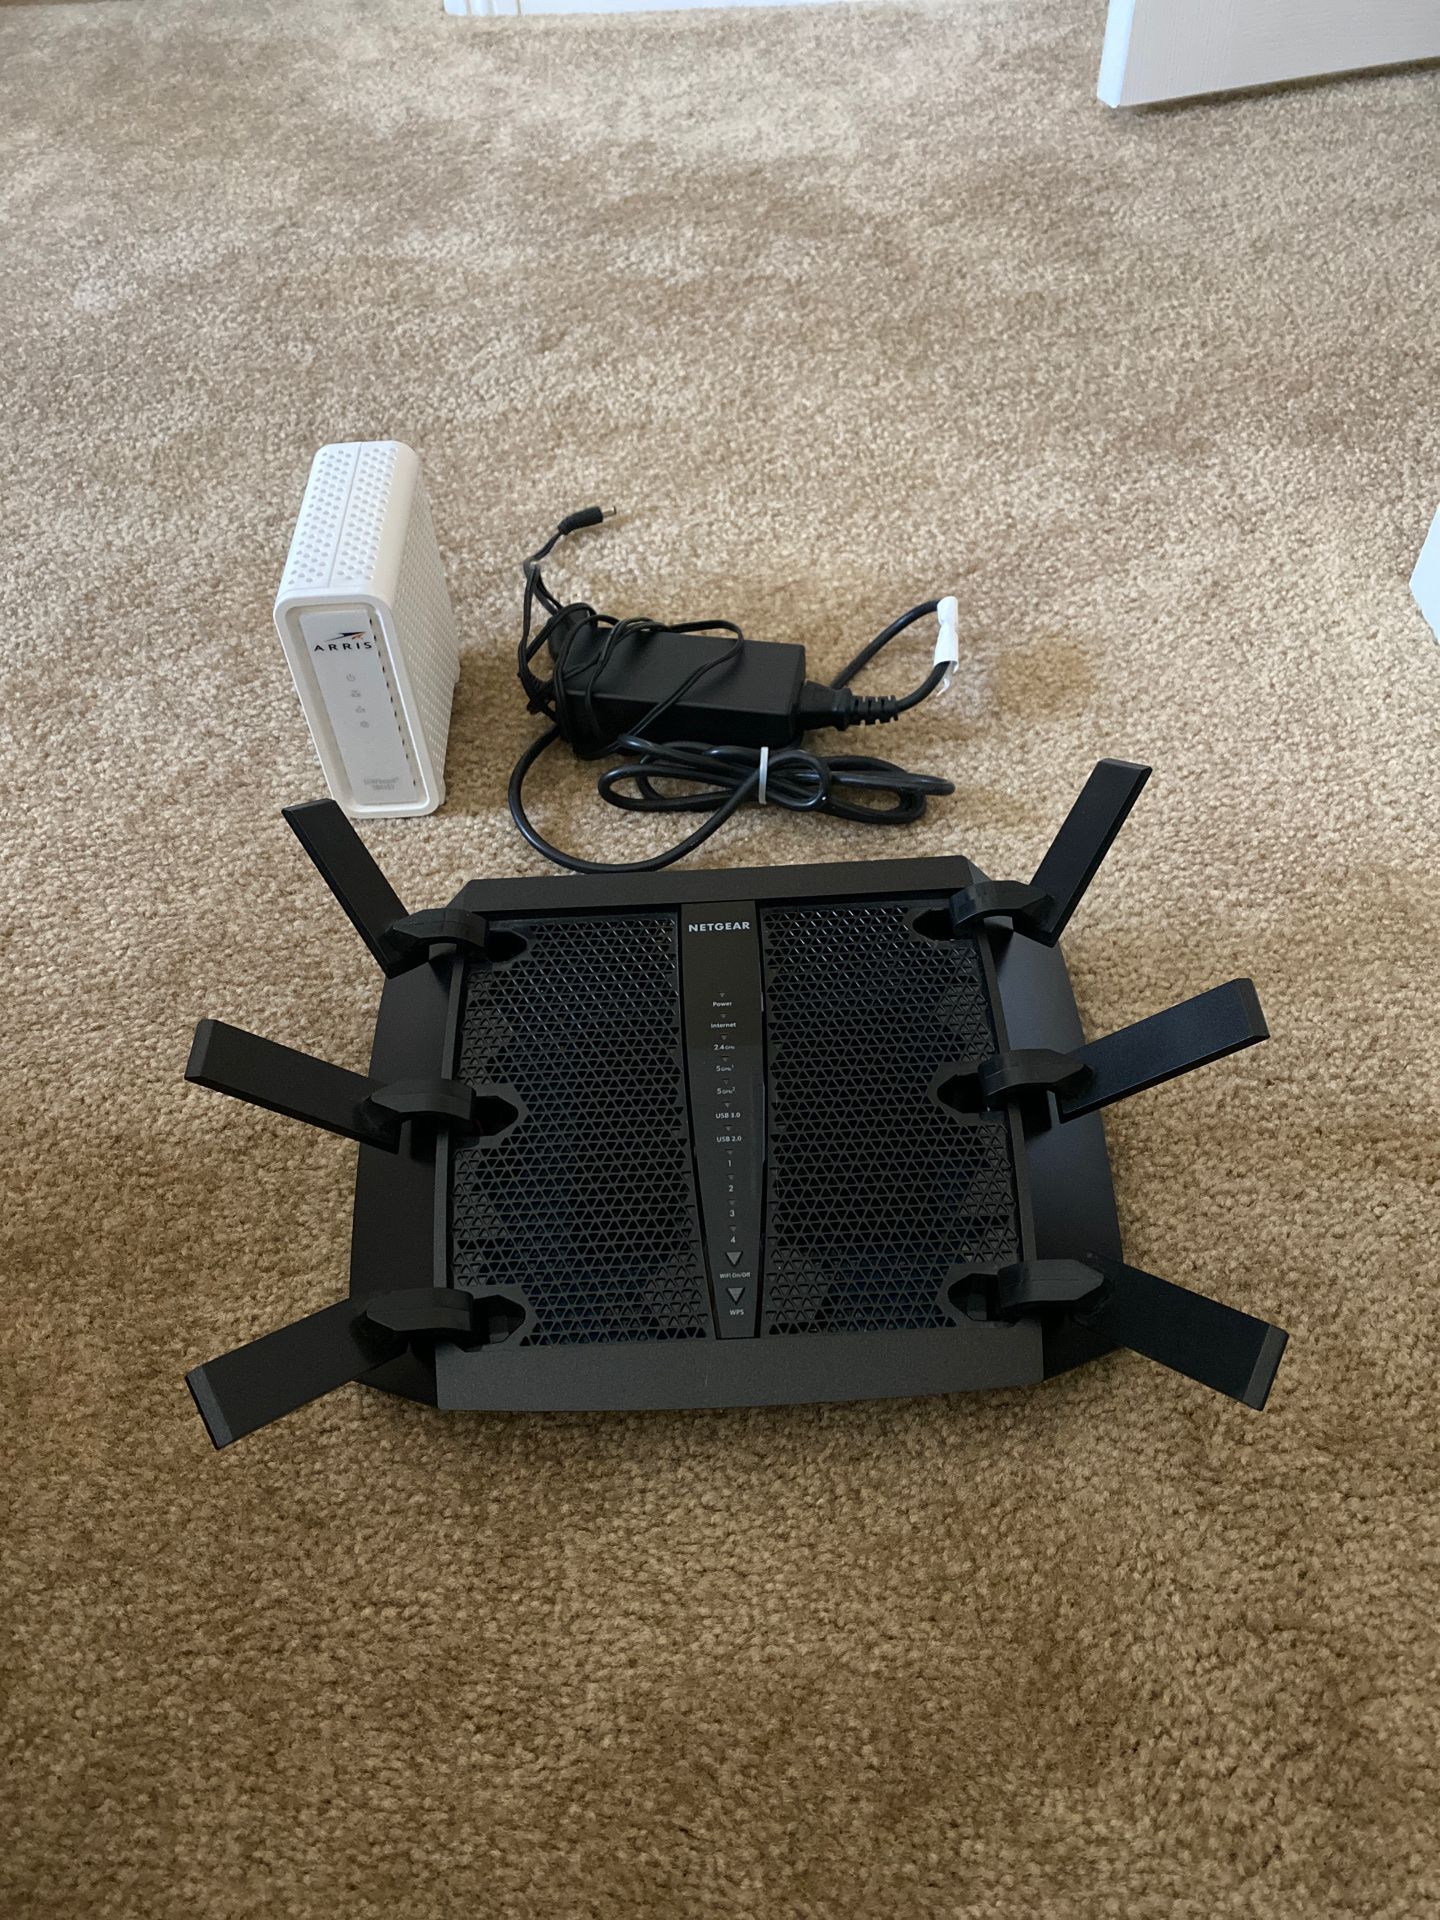 Netgear Nighthawk X6 Router with Cable Modem